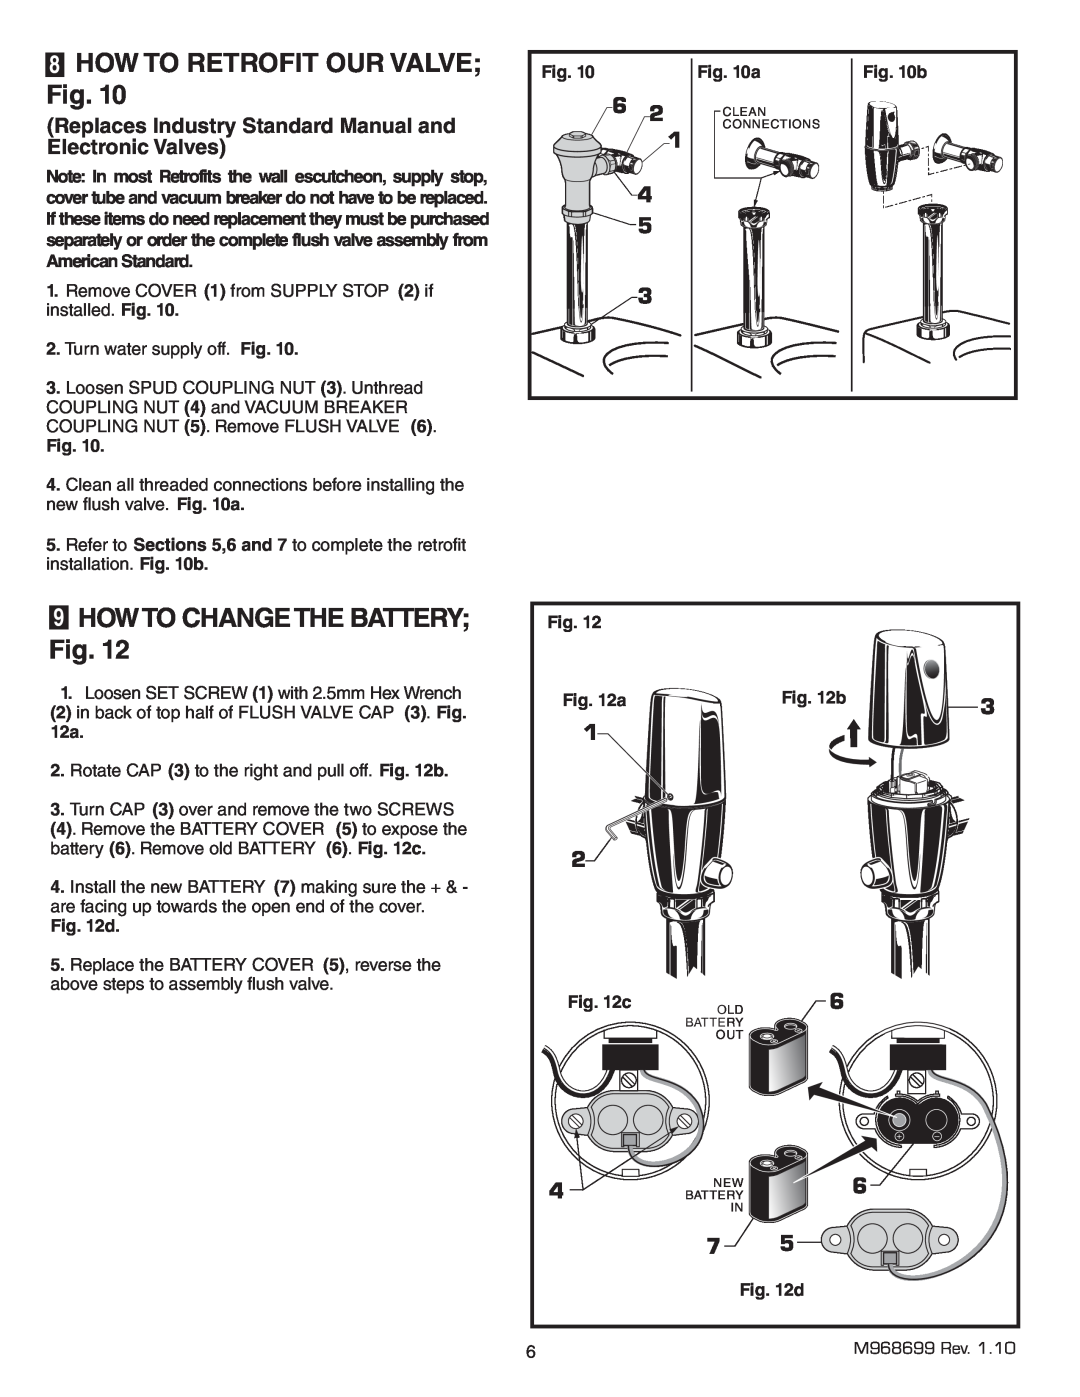 American Standard 6065.161, 6065.565, 6065.121, 6065.122 8HOW TO RETROFIT OUR VALVE Fig, 9HOWTO CHANGETHE BATTERY Fig 